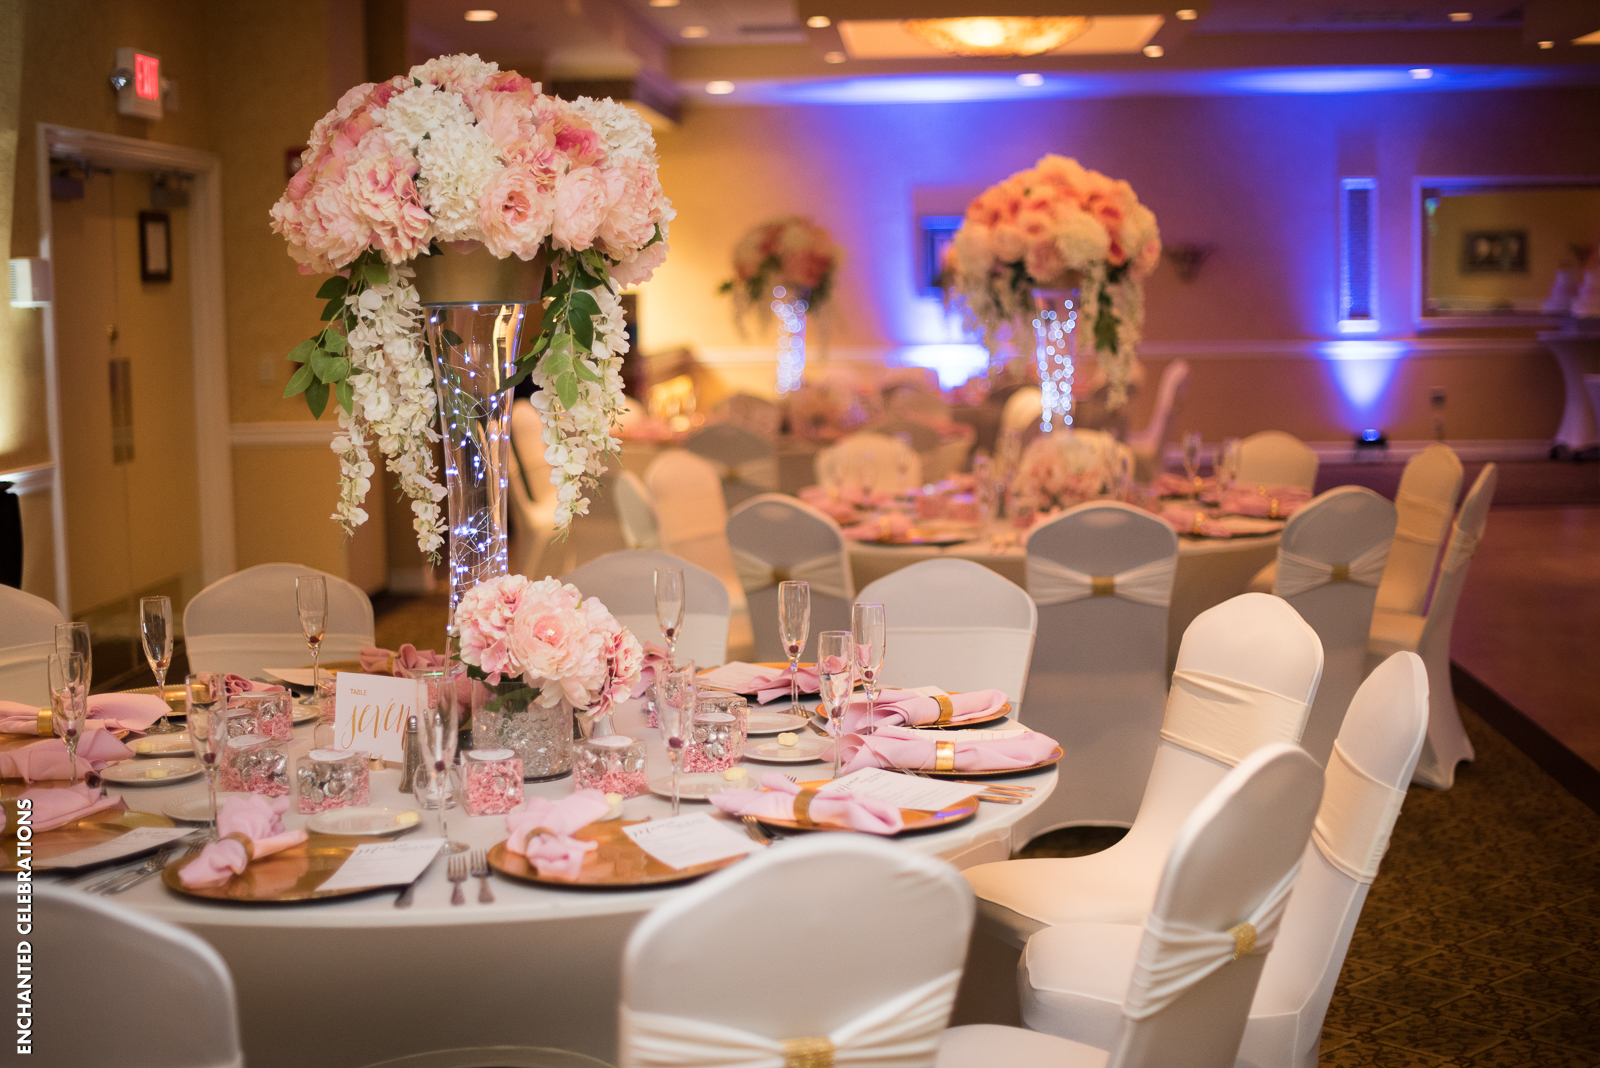 Bride and groom chose to decorate the Atlantis Ballroom in pretty pinks and gold accents.